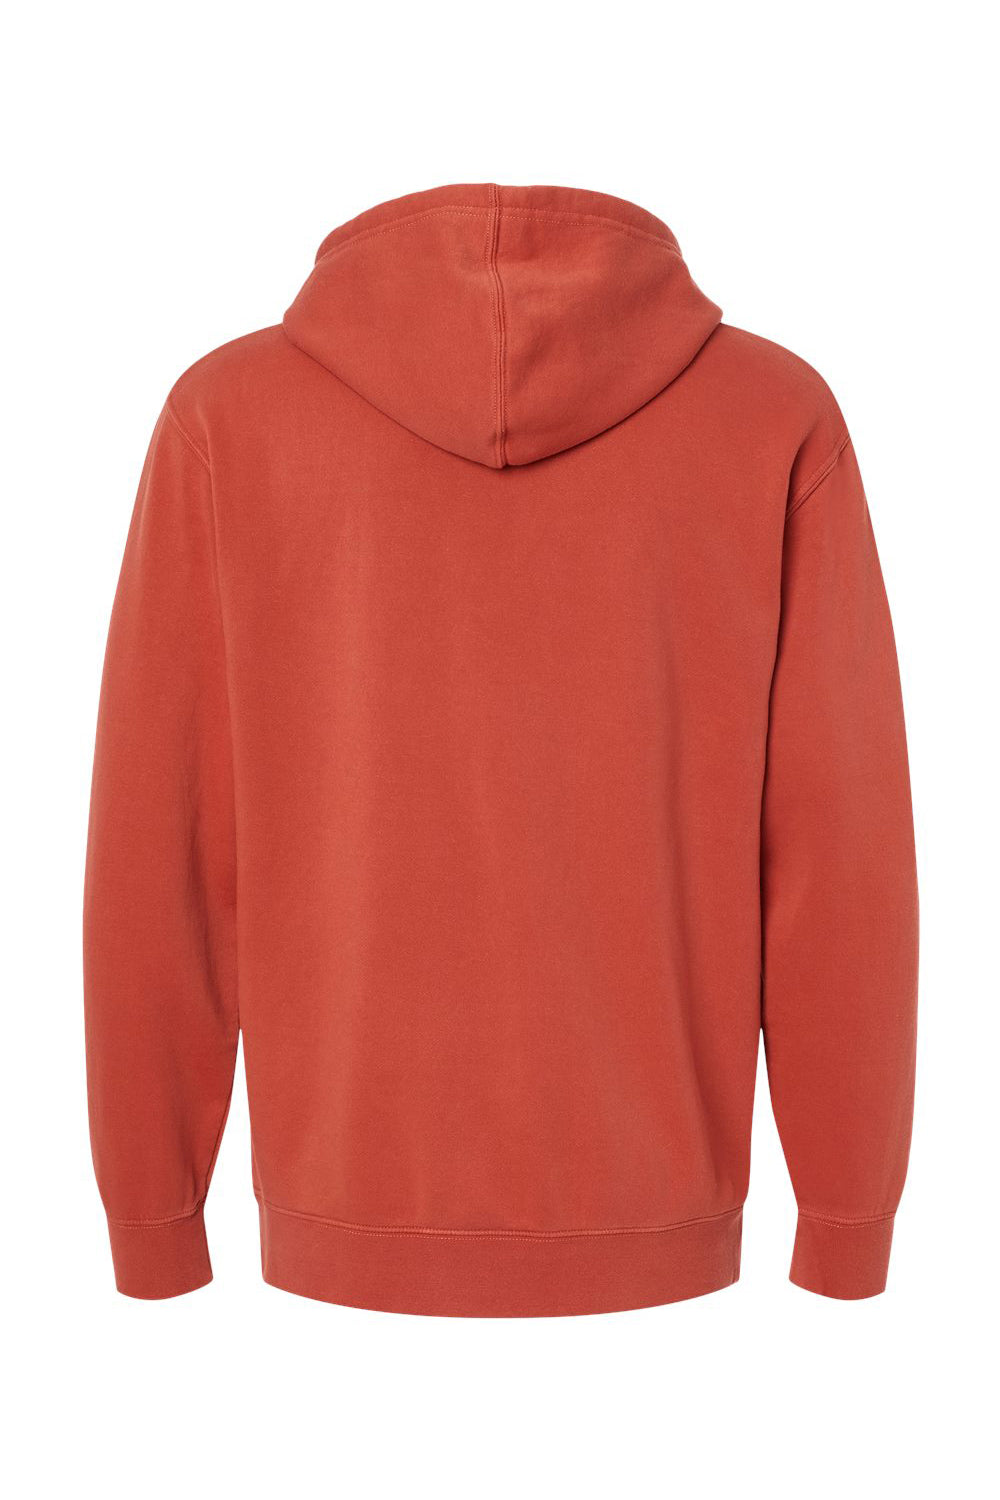 Independent Trading Co. PRM4500 Mens Pigment Dyed Hooded Sweatshirt Hoodie Amber Flat Back